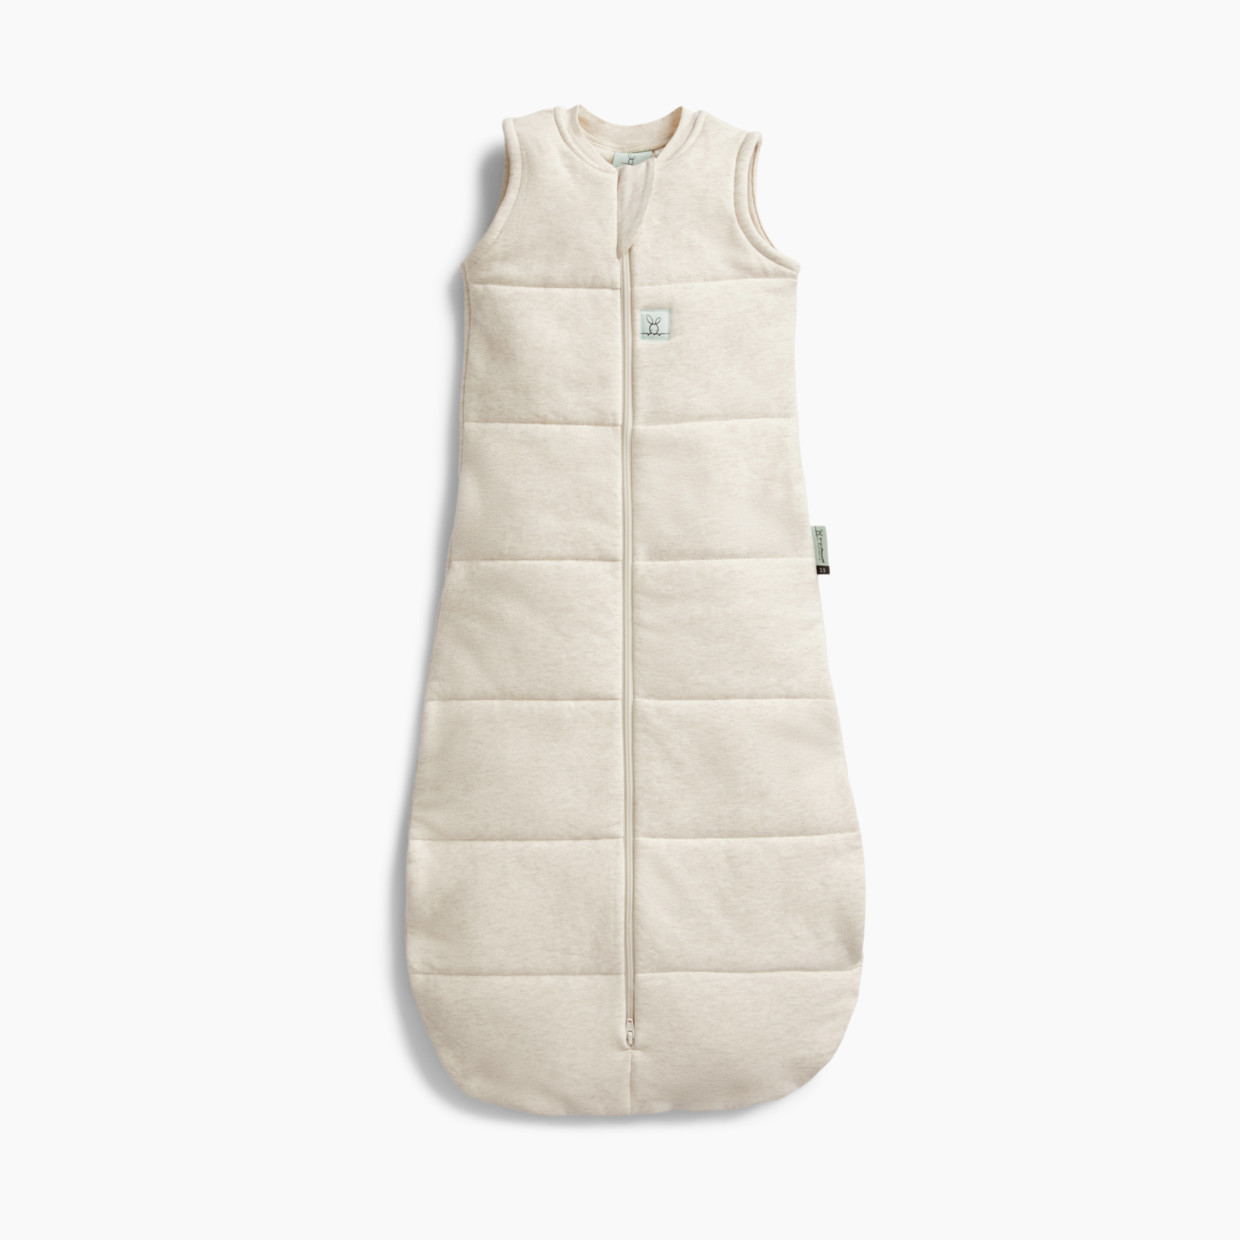 ergoPouch Jersey Sleep Sack 2.5 Tog - Oatmeal Marle, 3-12 Months.